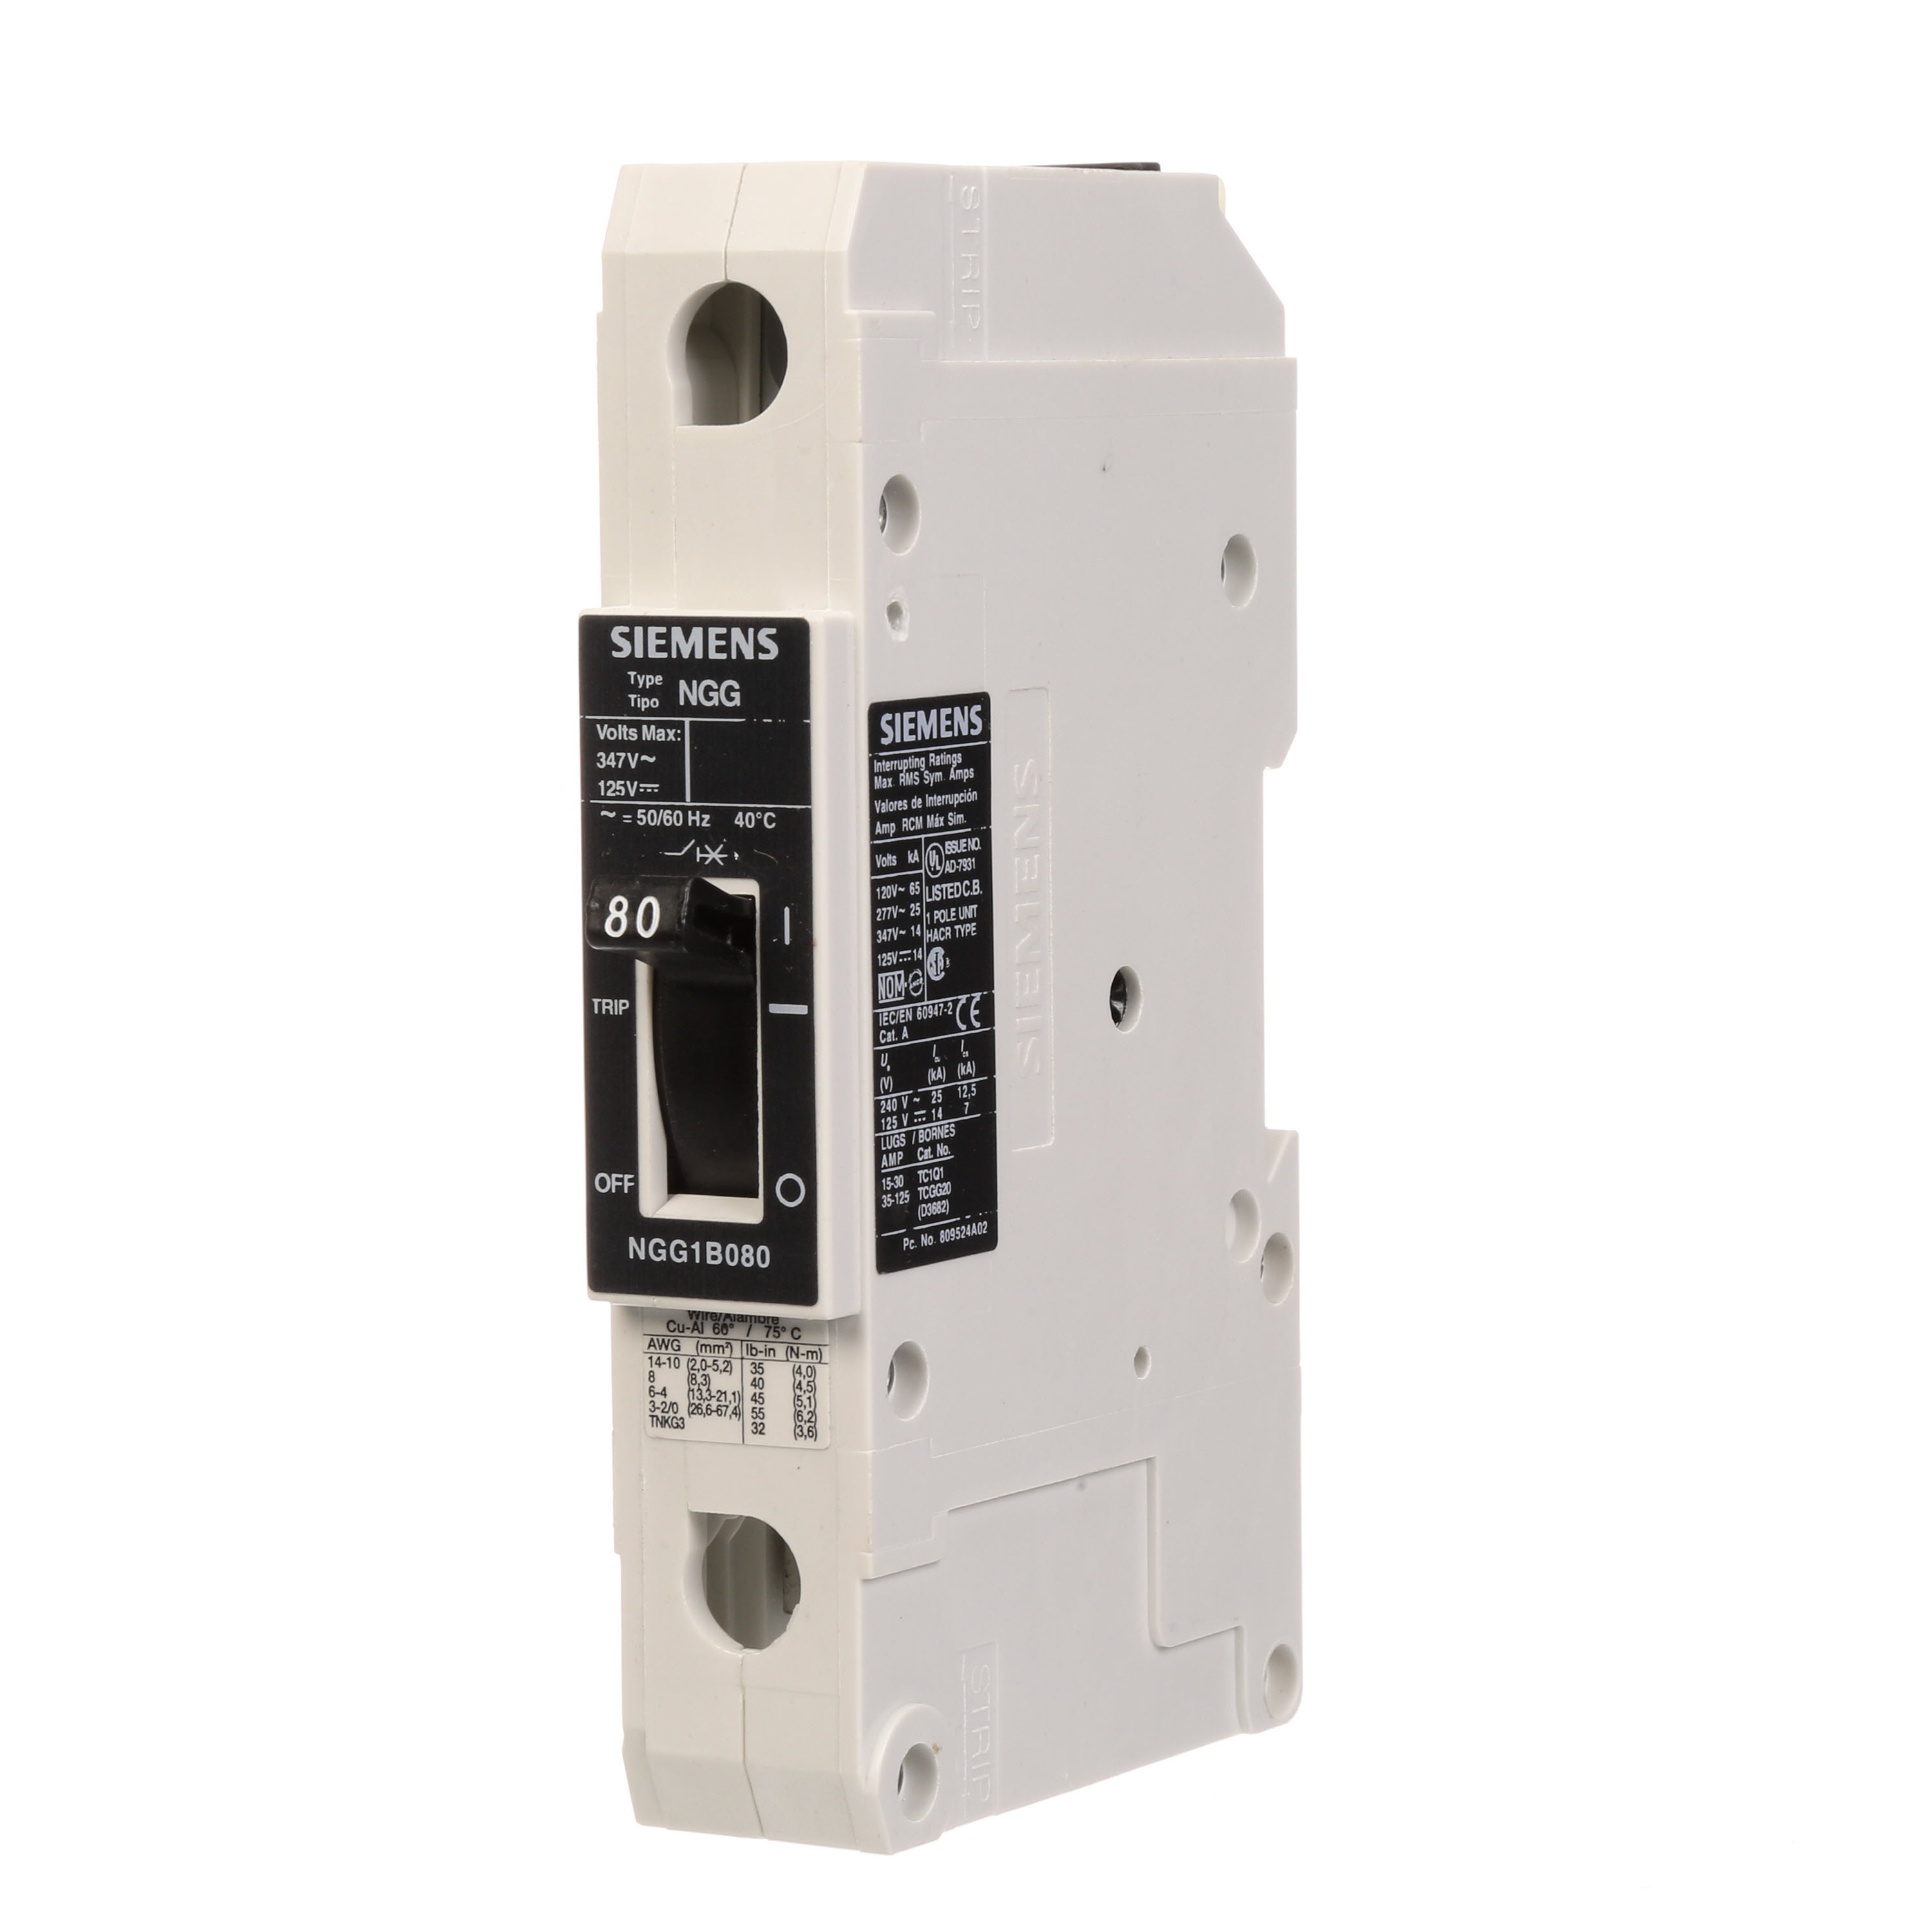 SIEMENS LOW VOLTAGE G FRAME CIRCUIT BREAKER WITH THERMAL - MAGNETIC TRIP. UL LISTED NGG FRAME WITH STANDARD BREAKING CAPACITY. 80A 1-POLE (14KAIC AT 347V) (25KAIC AT 277V). SPECIAL FEATURES MOUNTS ON DIN RAIL / SCREW, LINE AND LOAD SIDE LUGS (TC1GG20) WIRE RANGE 8 - 1/0 AWS (CU/AL). DIMENSIONS (W x H x D) IN 1 x 5.4 x2.8.